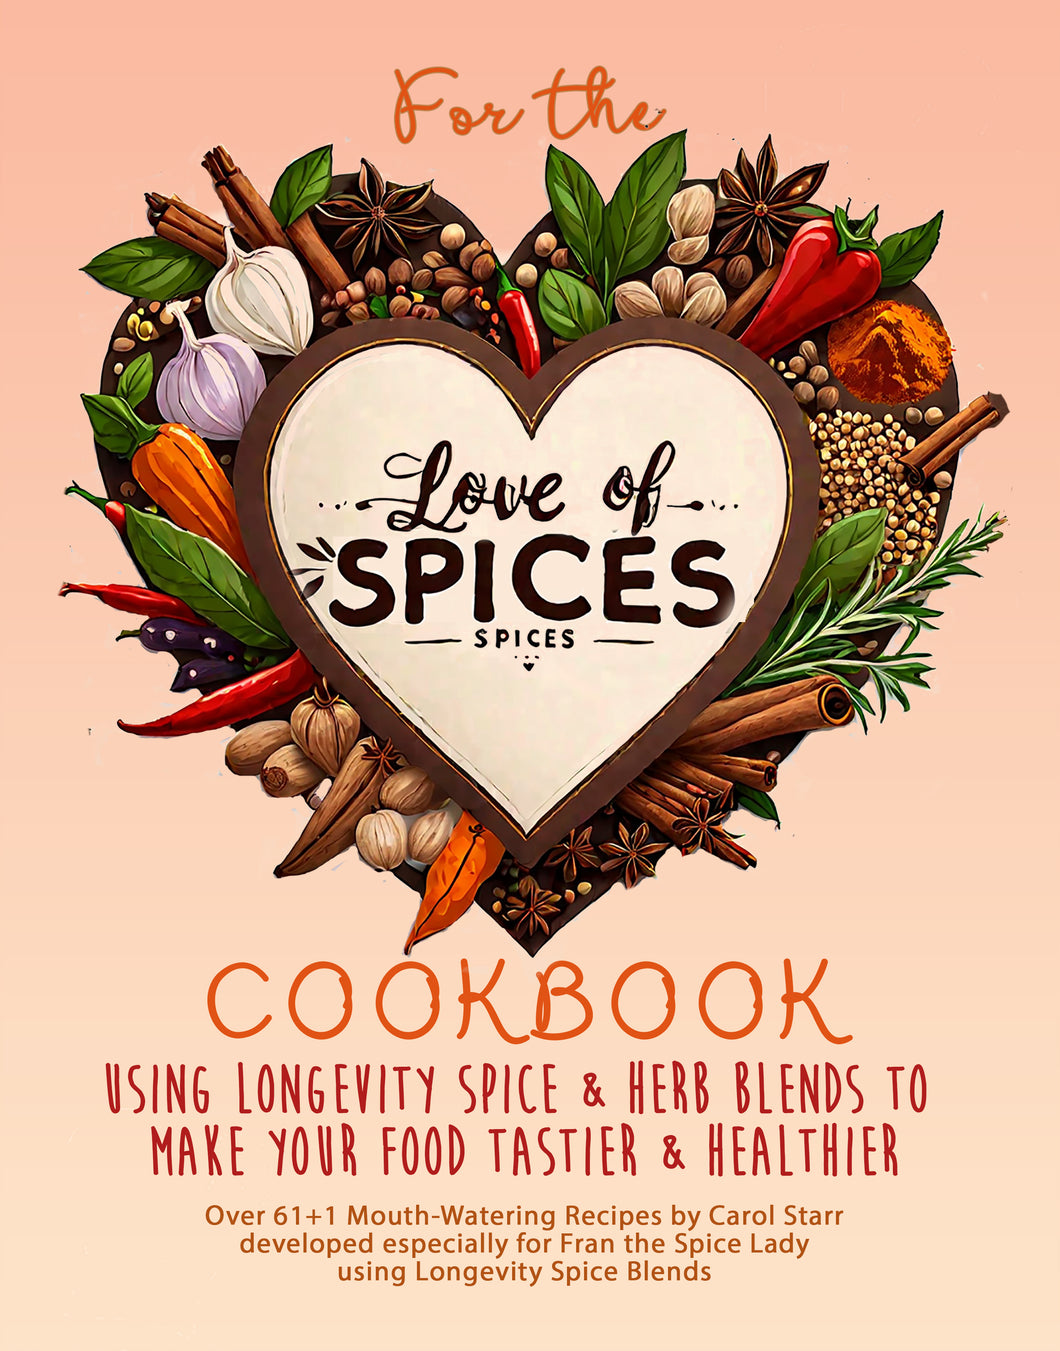 For the Love of Spices Cookbook, 61+ Mouthwatering Recipes using Longevity Spice Blends